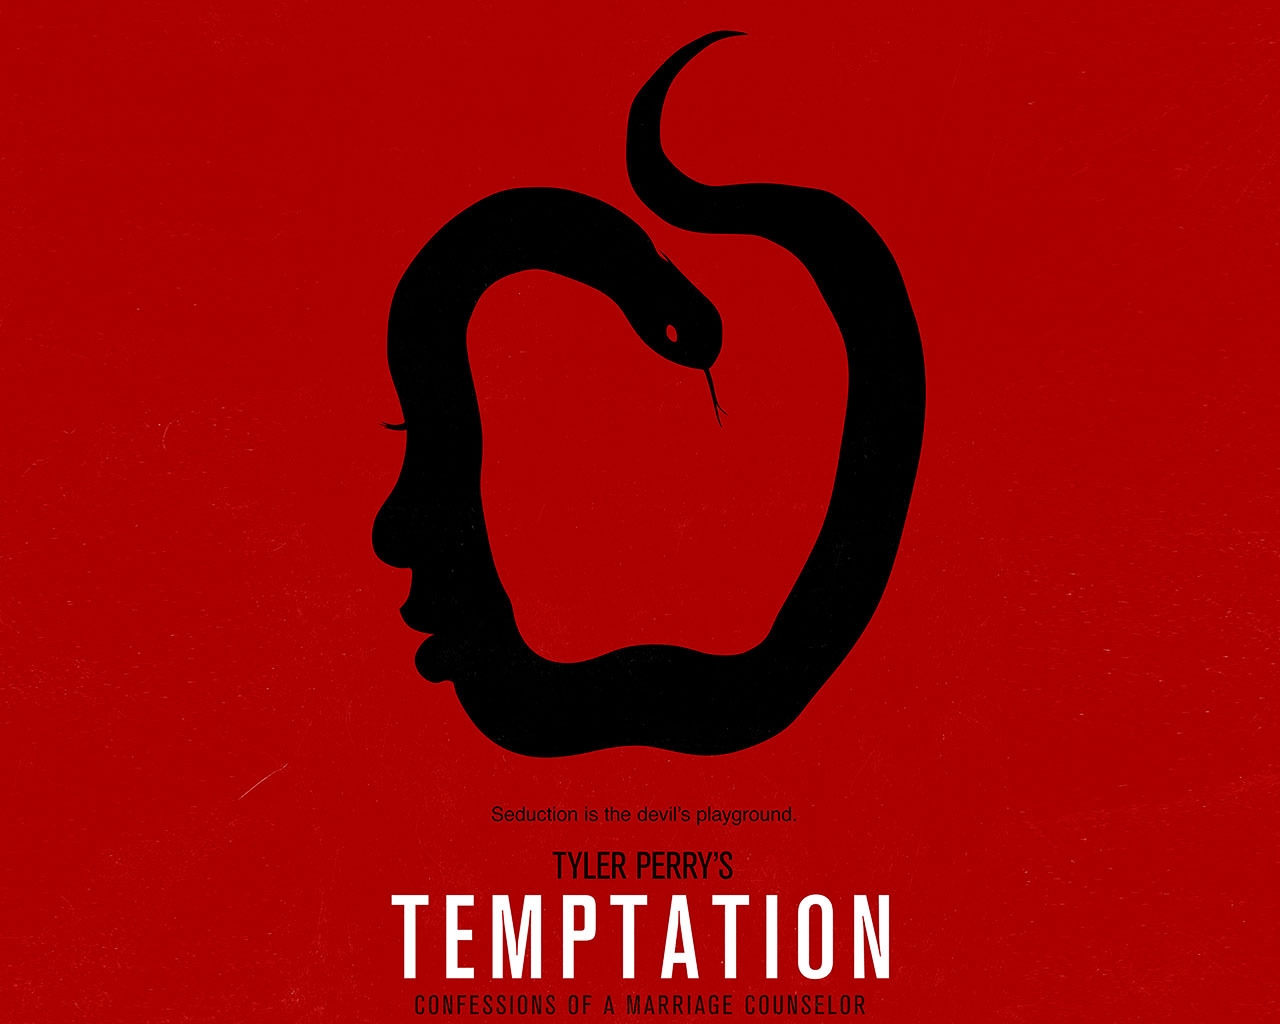 Tyler Perry Temptation for 1280 x 1024 resolution